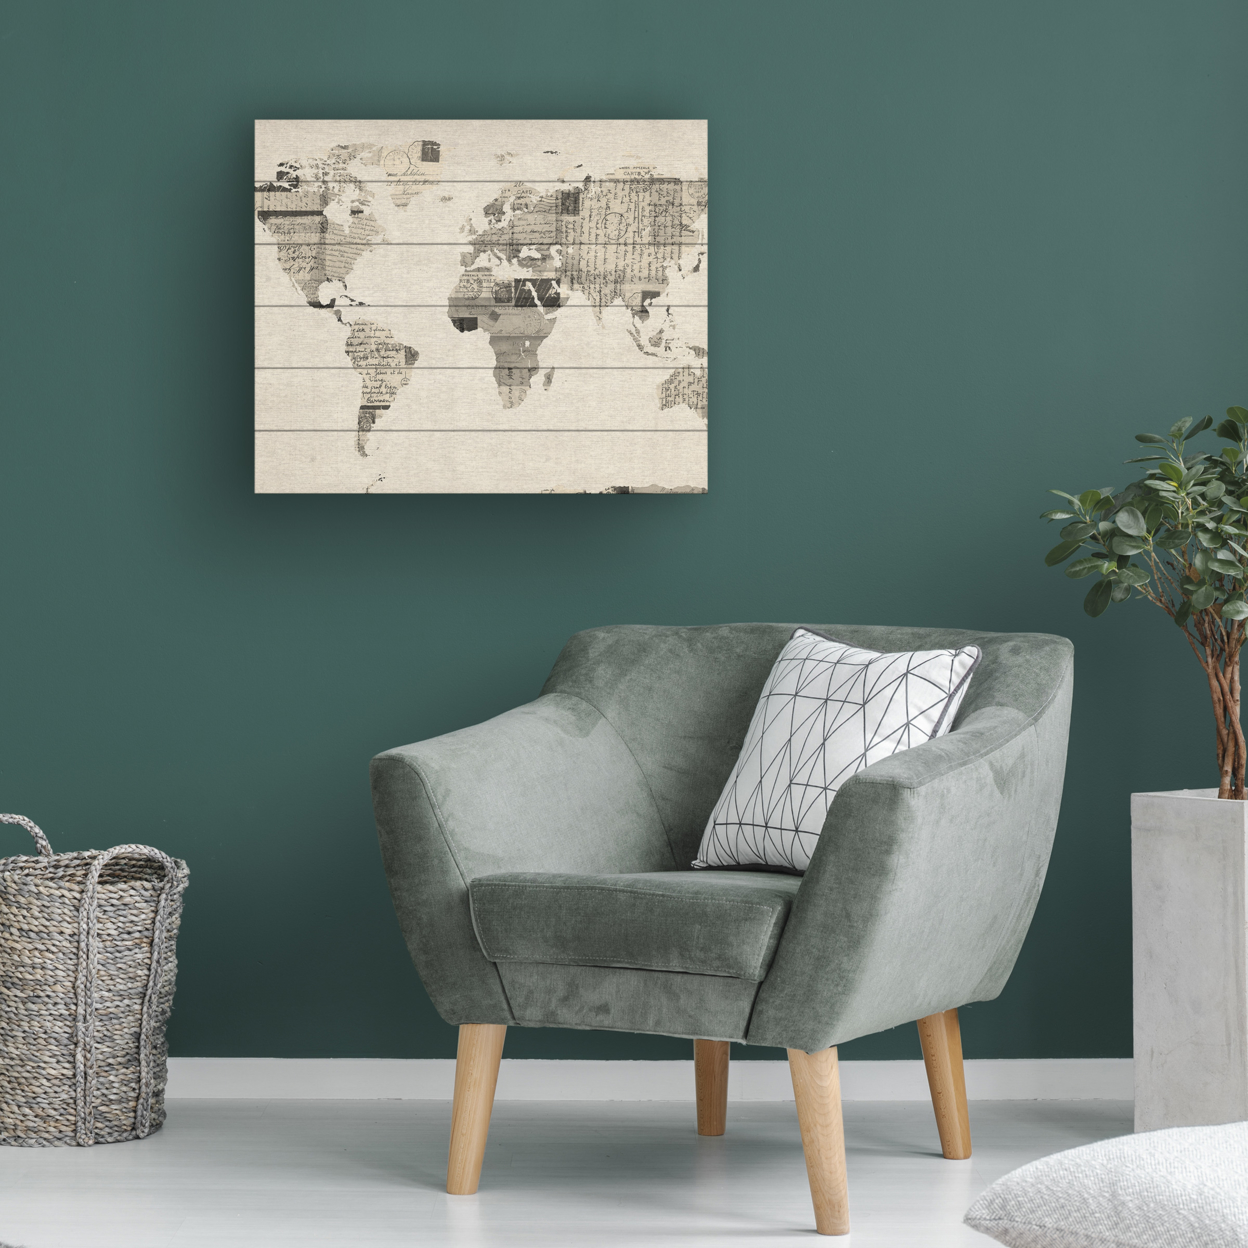 Wooden Slat Art 18 X 22 Inches Titled Vintage Postcards World Map Ready To Hang Home Decor Picture